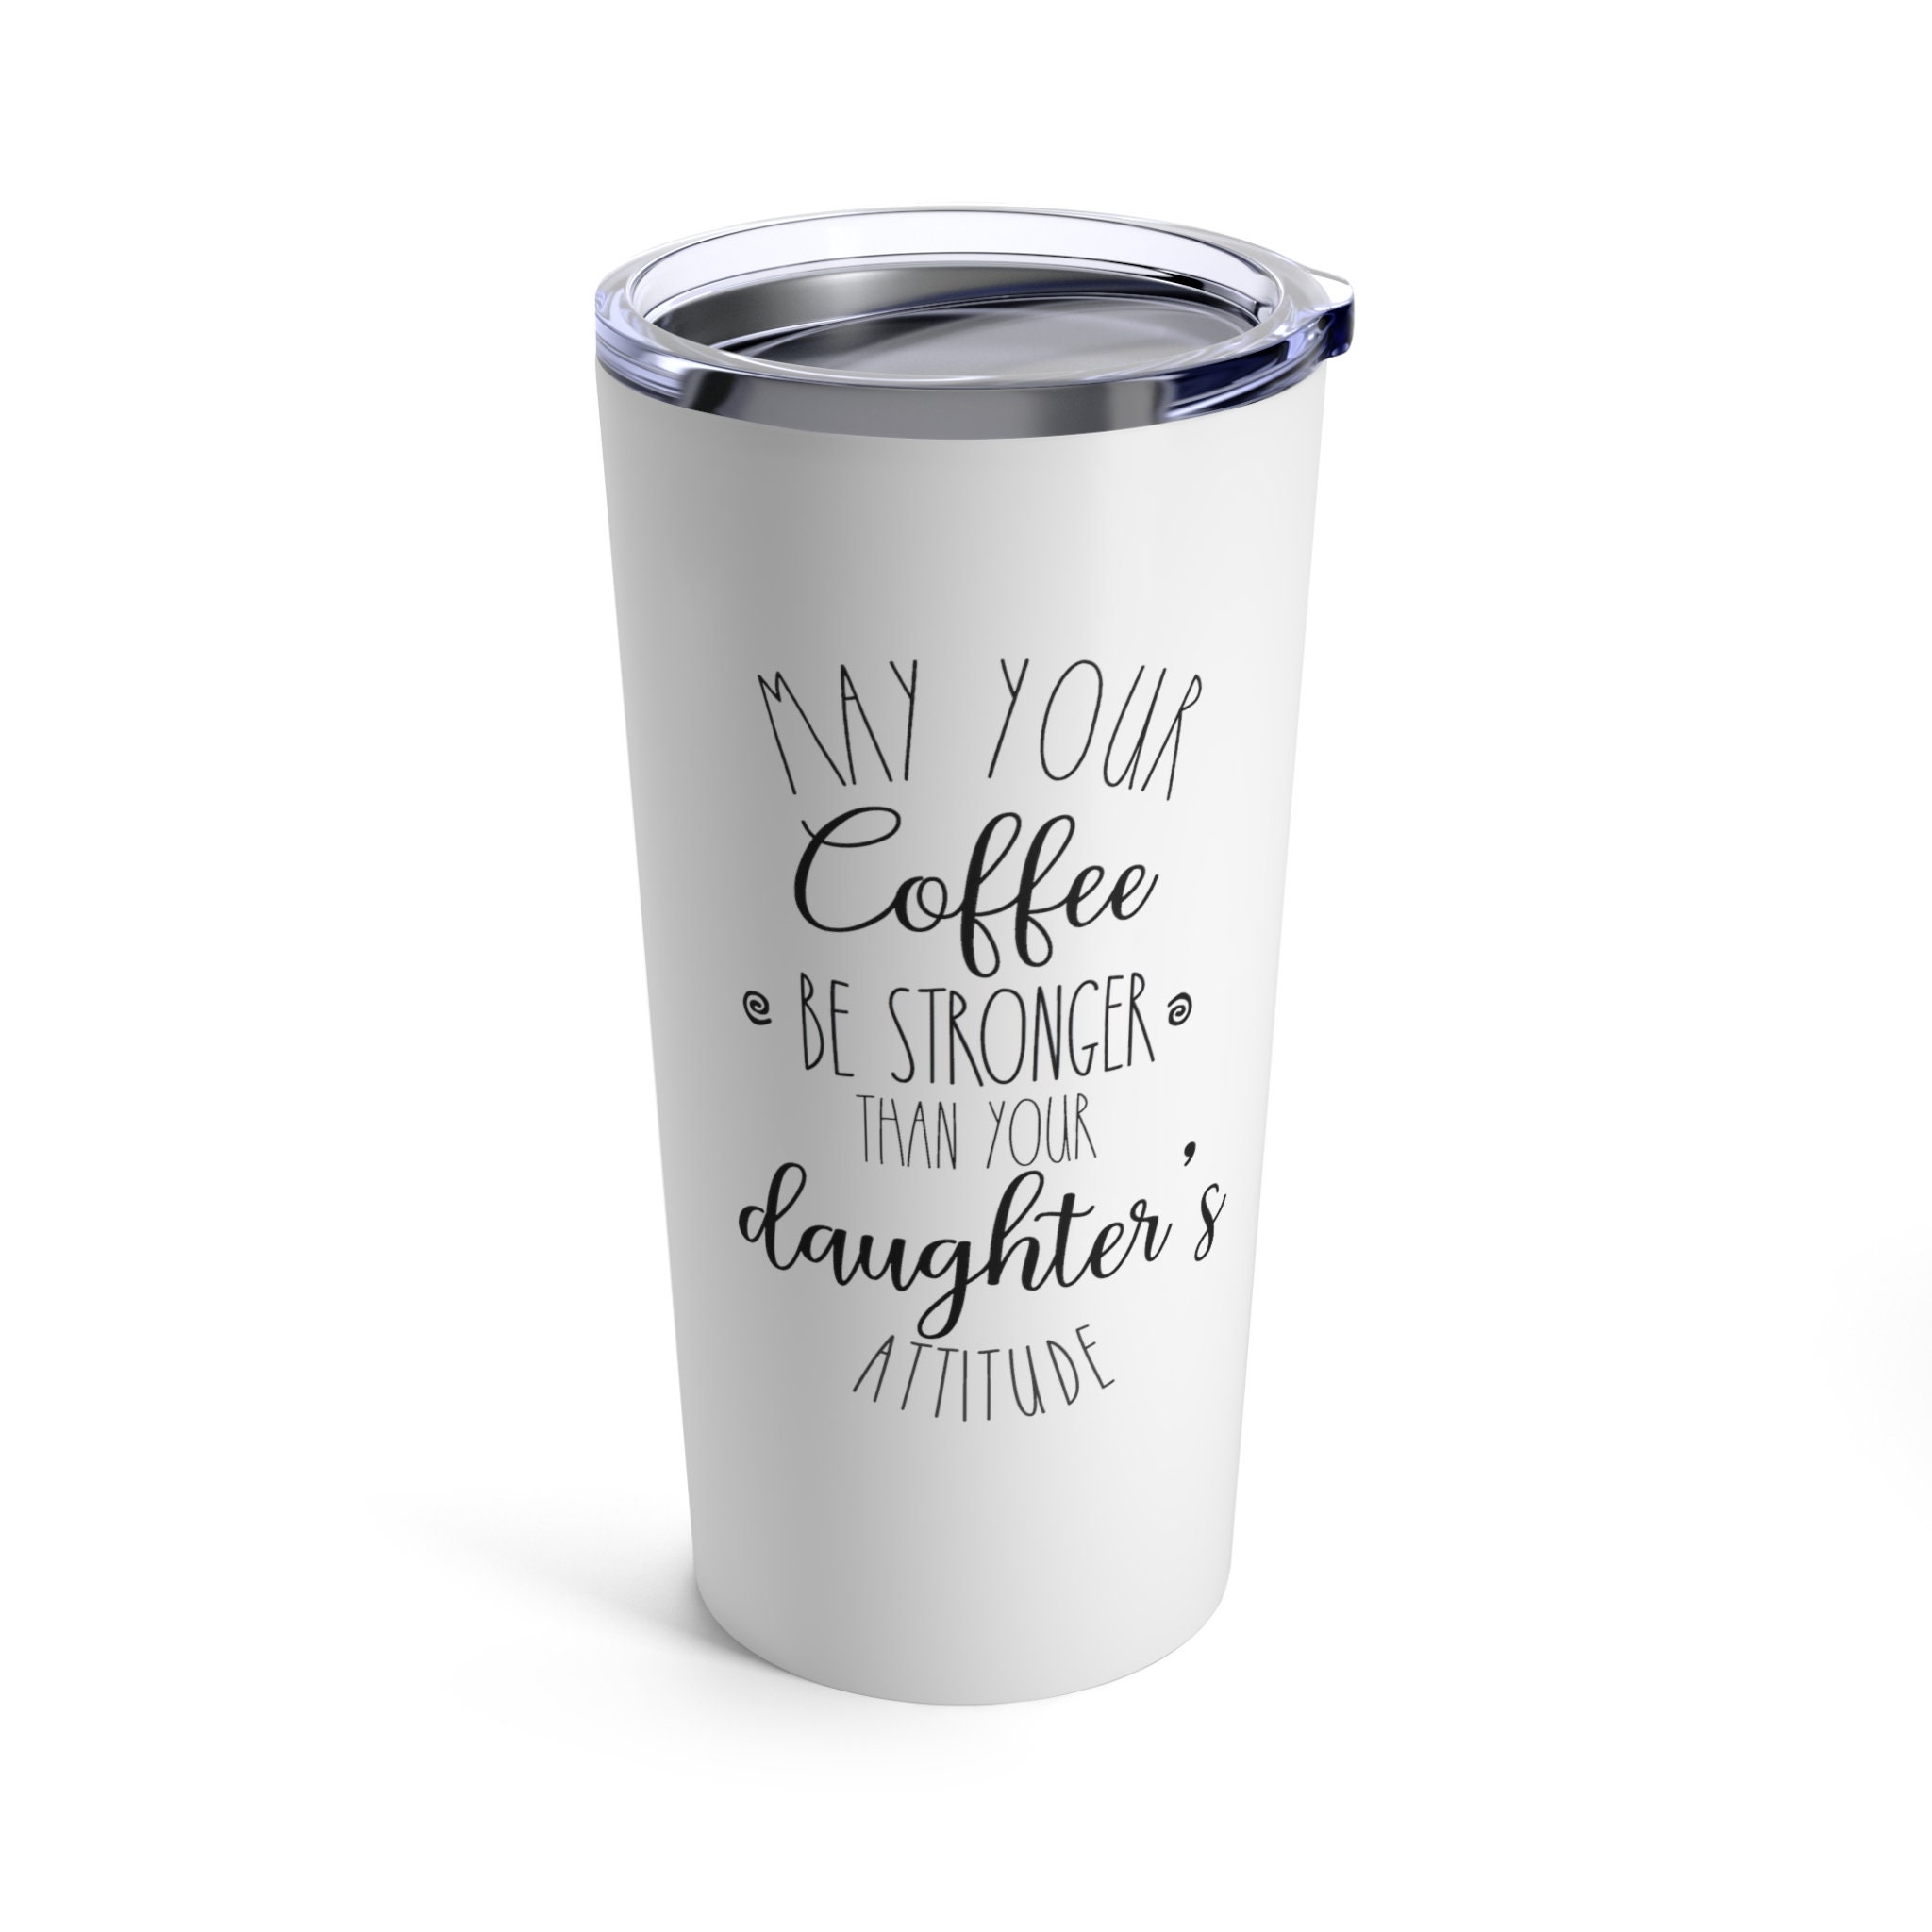 May Your Coffee Be Stronger Than Your Daughter's Attitude - Engraved  Stainless Steel Tumbler, Funny Parent Gift, Mom Tumbler